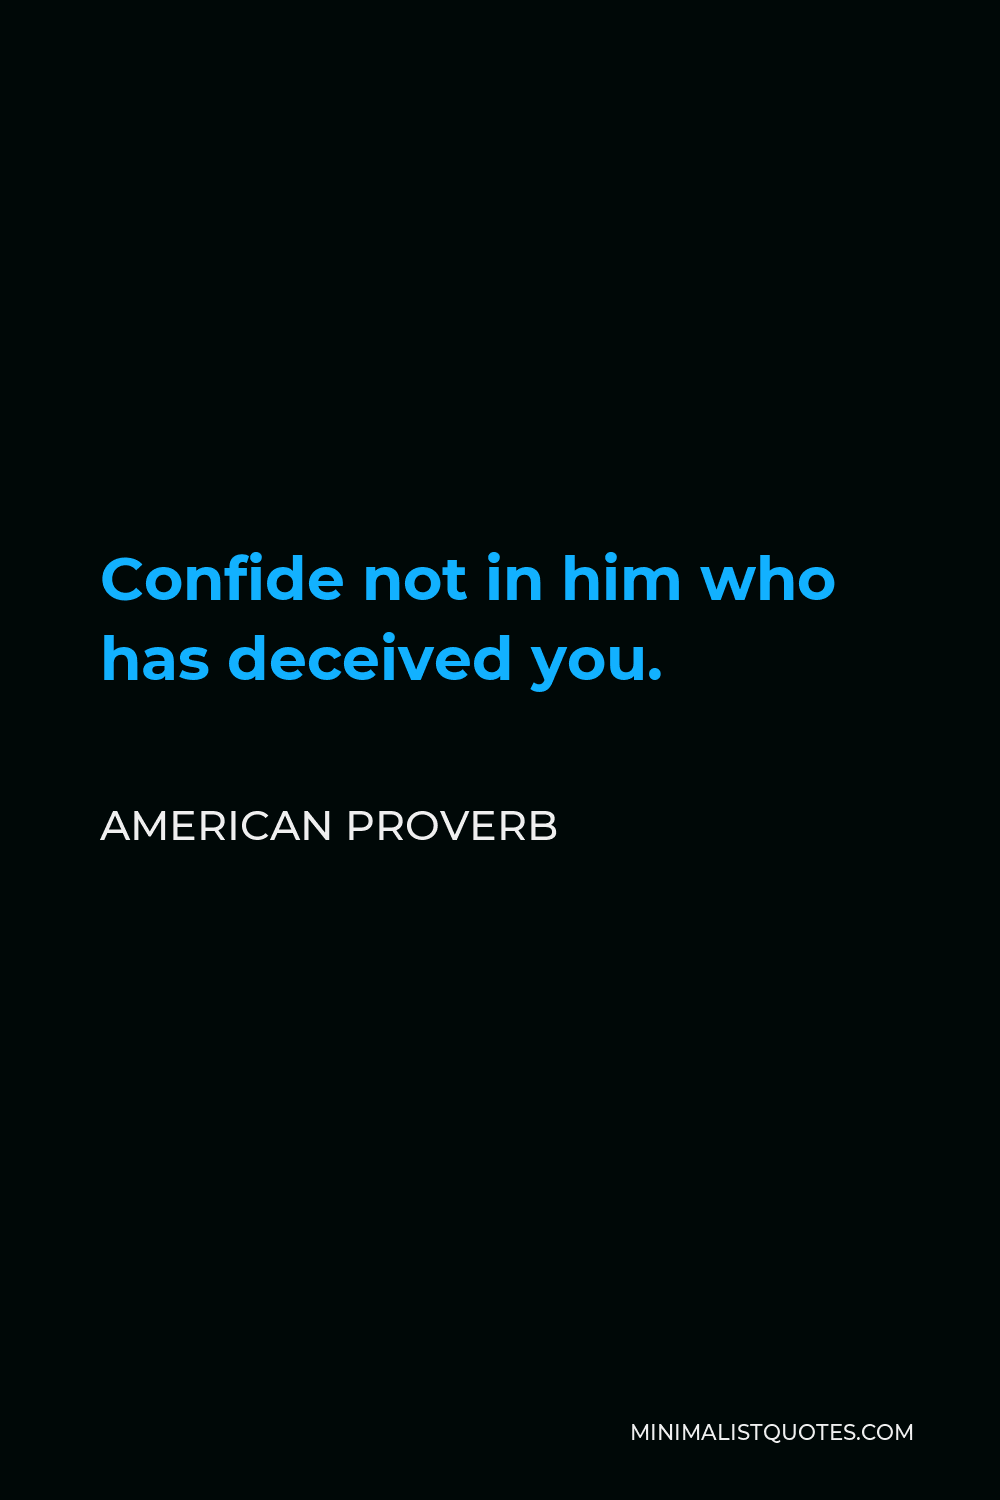 American Proverb Quote - Confide not in him who has deceived you.